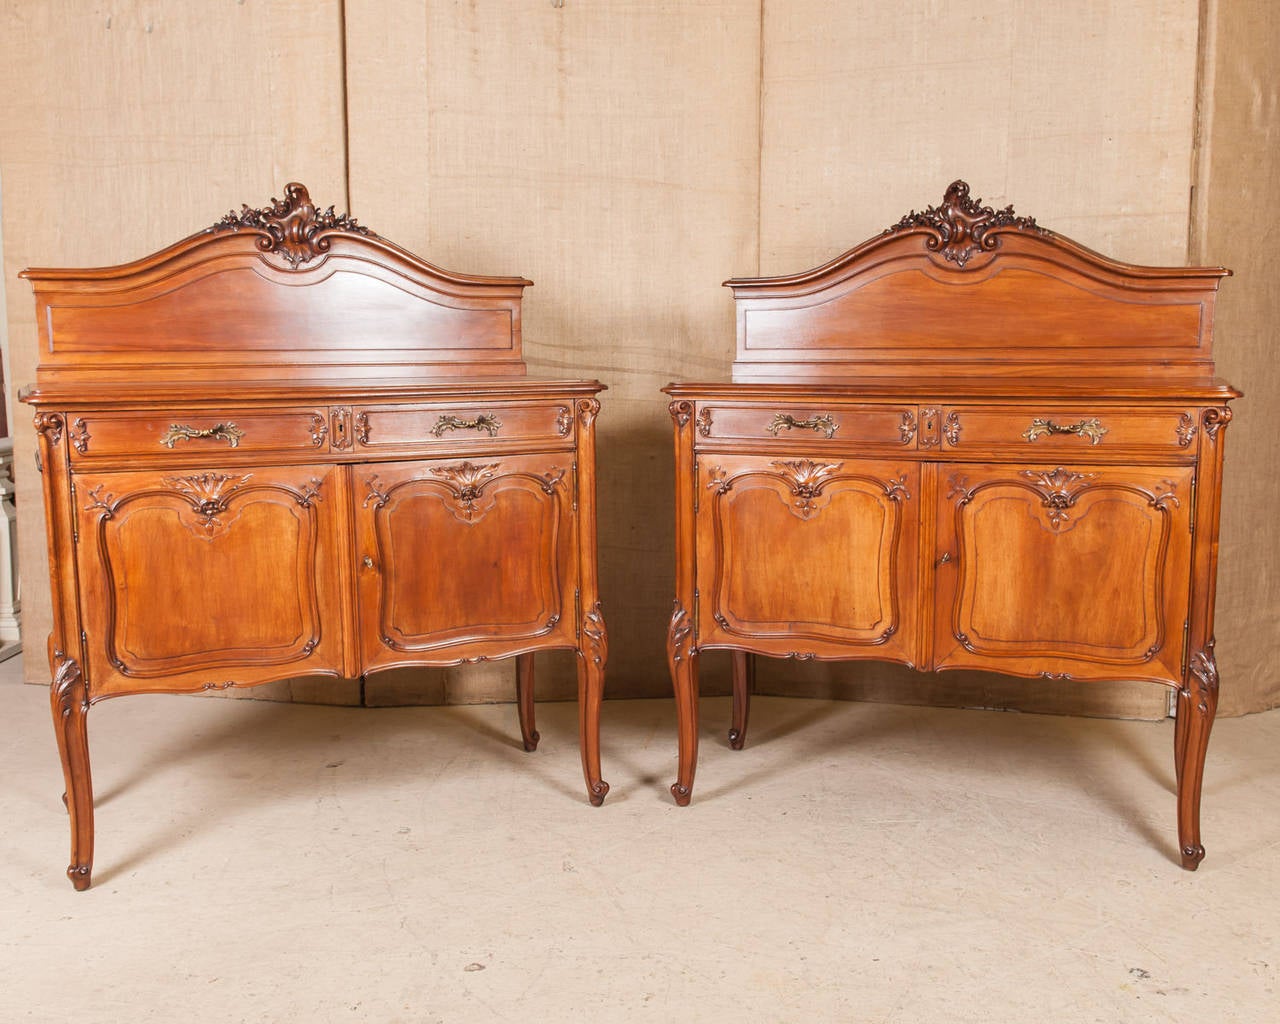 Frédéric Schmit pair of Louis XV style buffets. From La Belle Époque period in France, these beautiful and expertly crafted solid walnut buffets by famous French ebenisterie Schmit are a faithful Rococo Revival, from the elaborately carved flowers